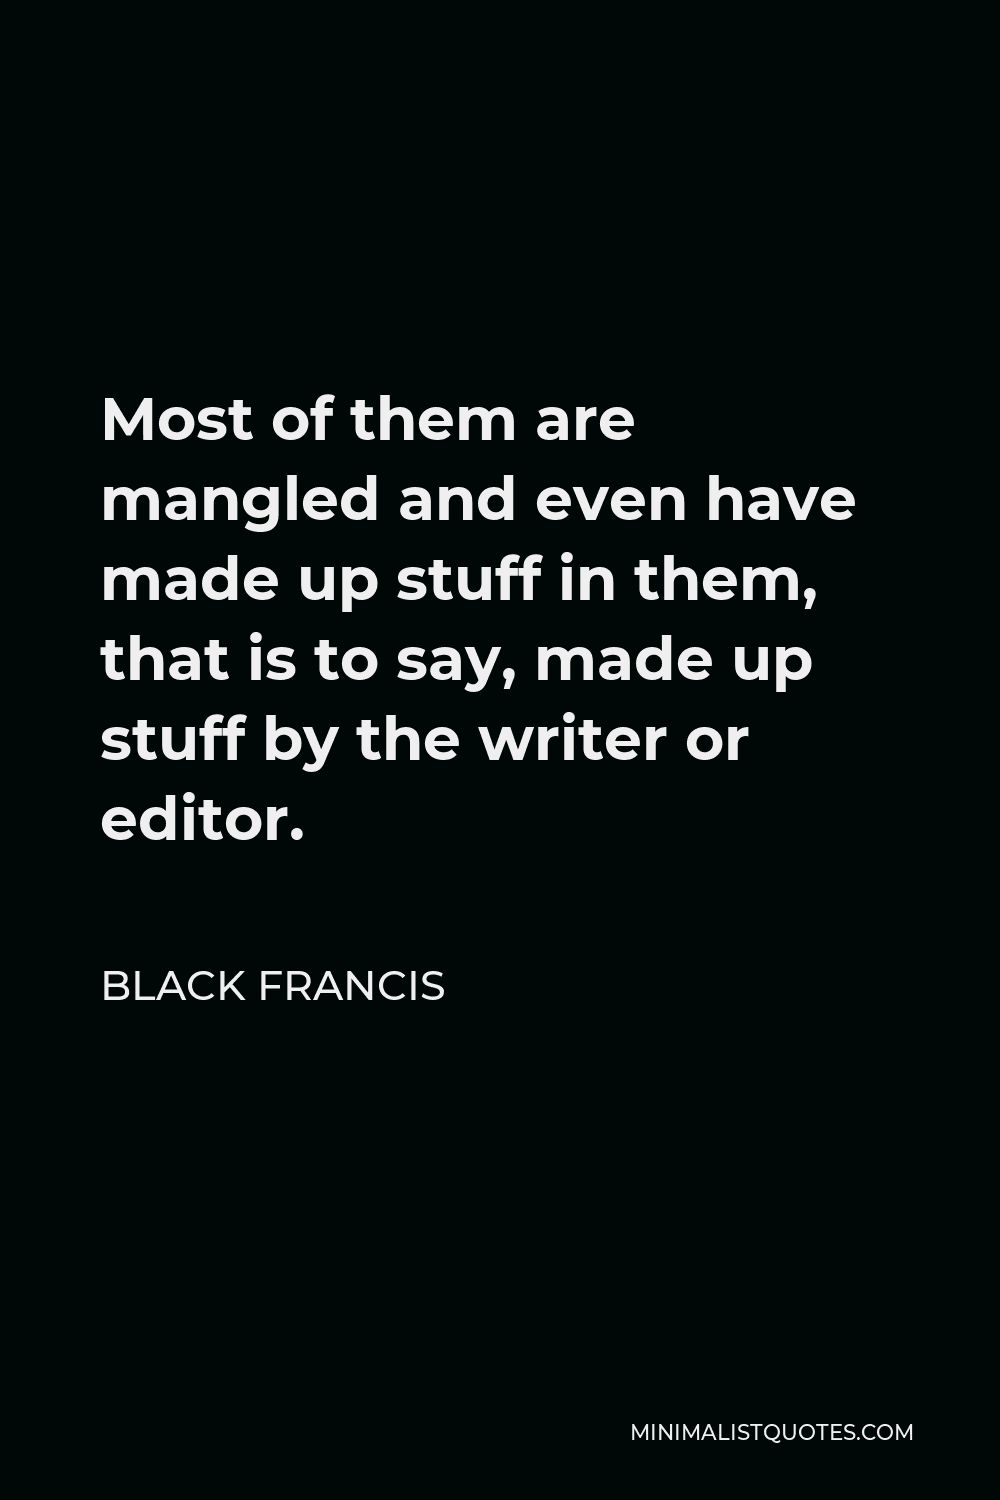 Black Francis Quote - Most of them are mangled and even have made up stuff in them, that is to say, made up stuff by the writer or editor.